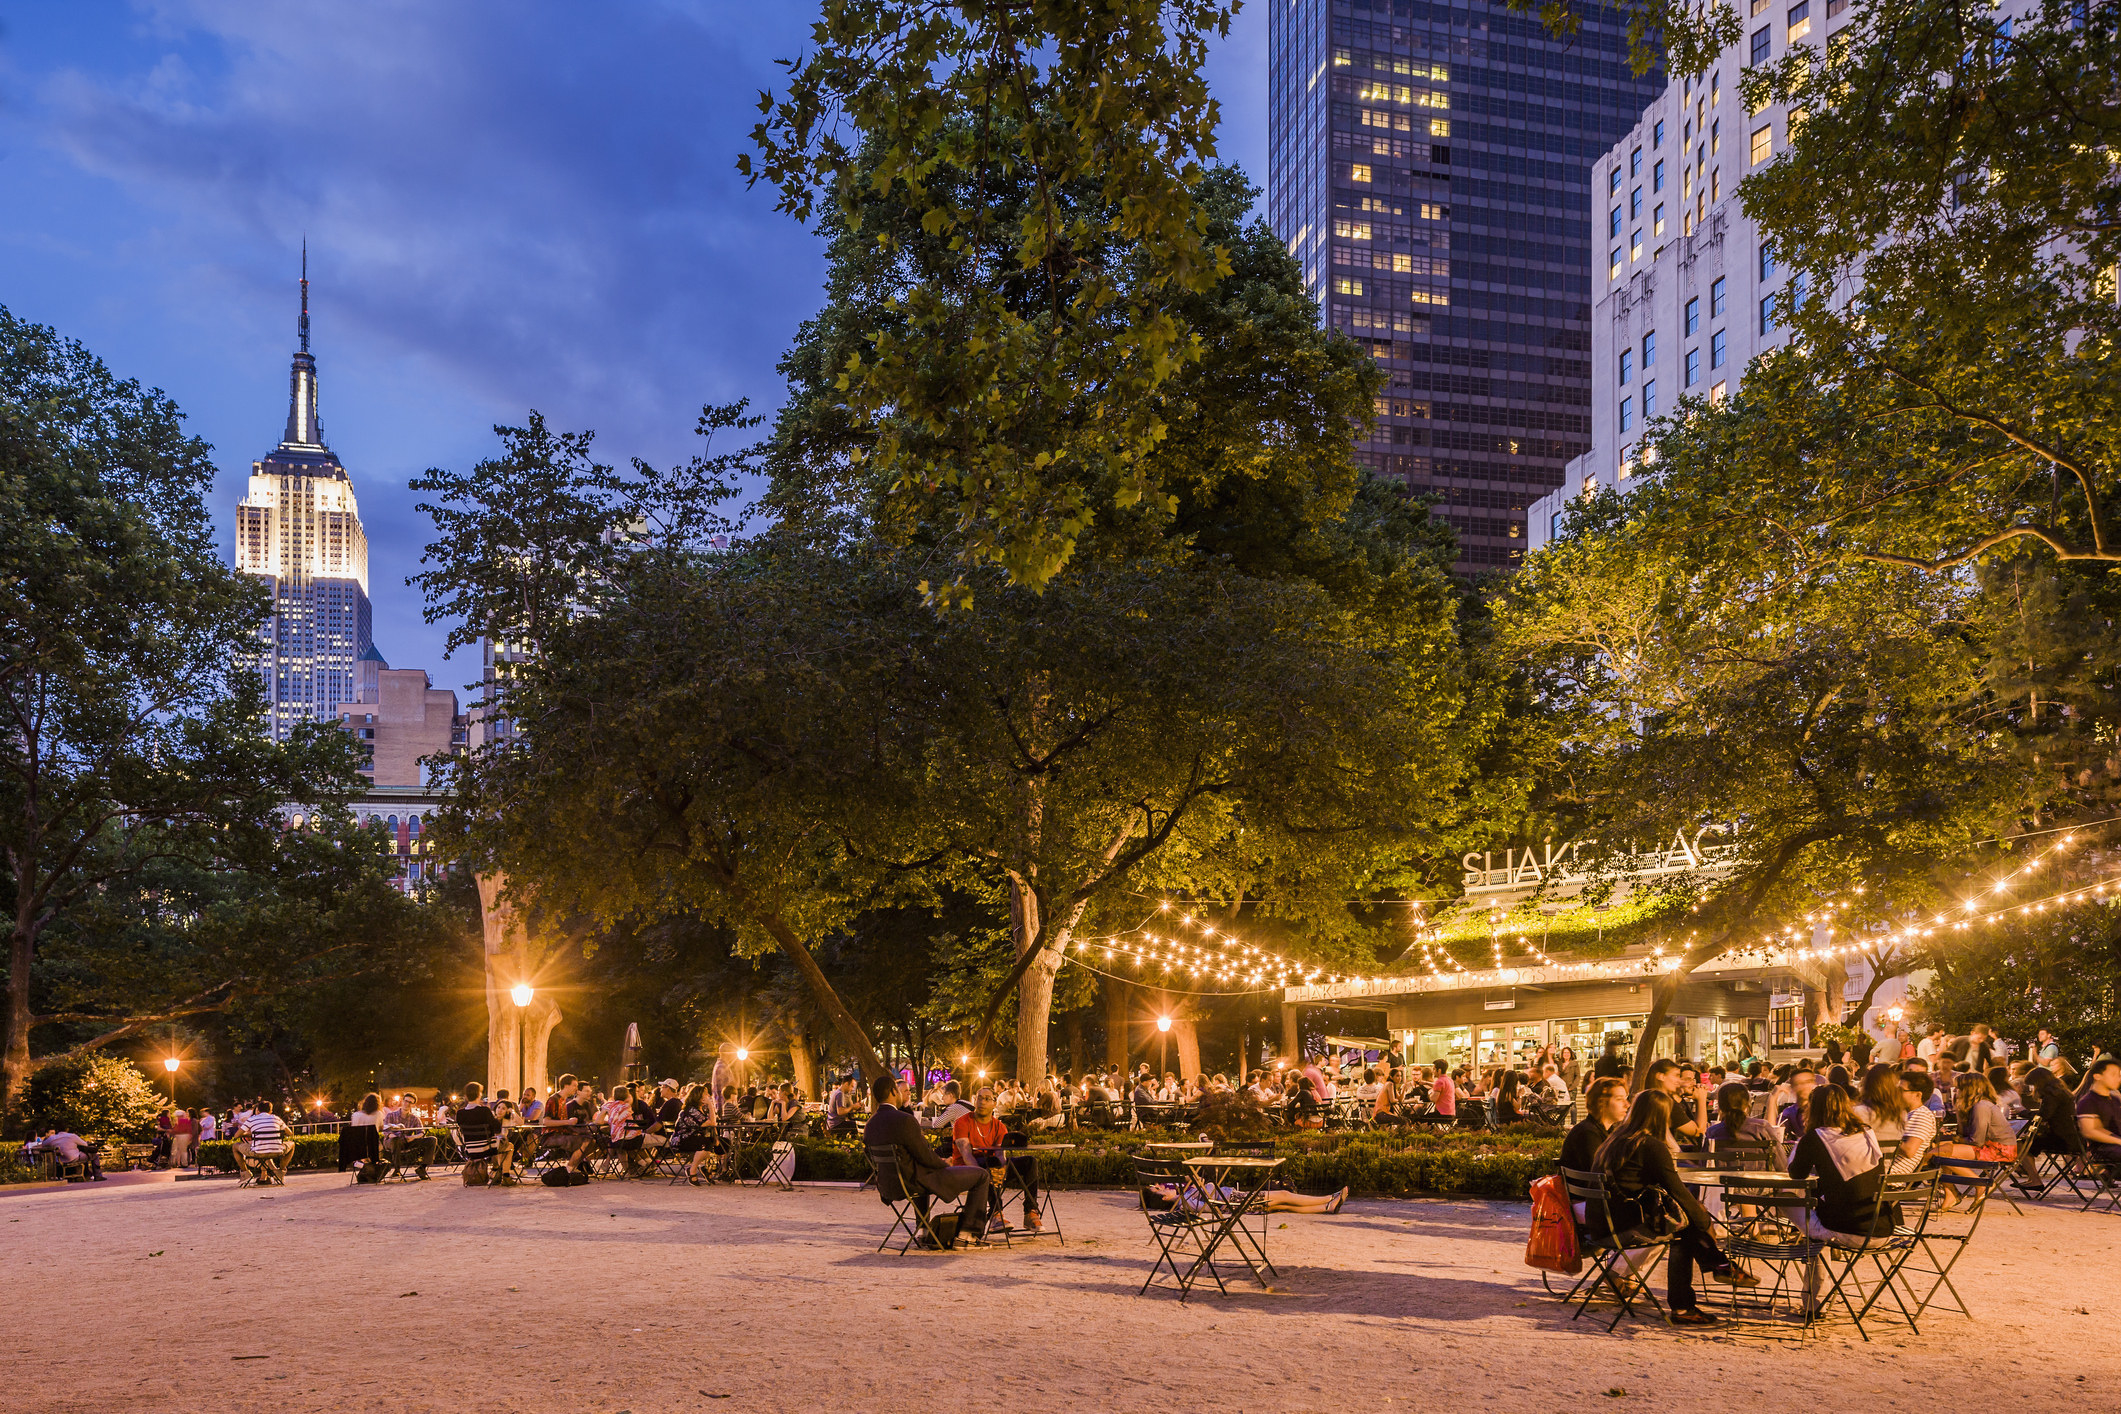 People dining outside in a park in NYC.